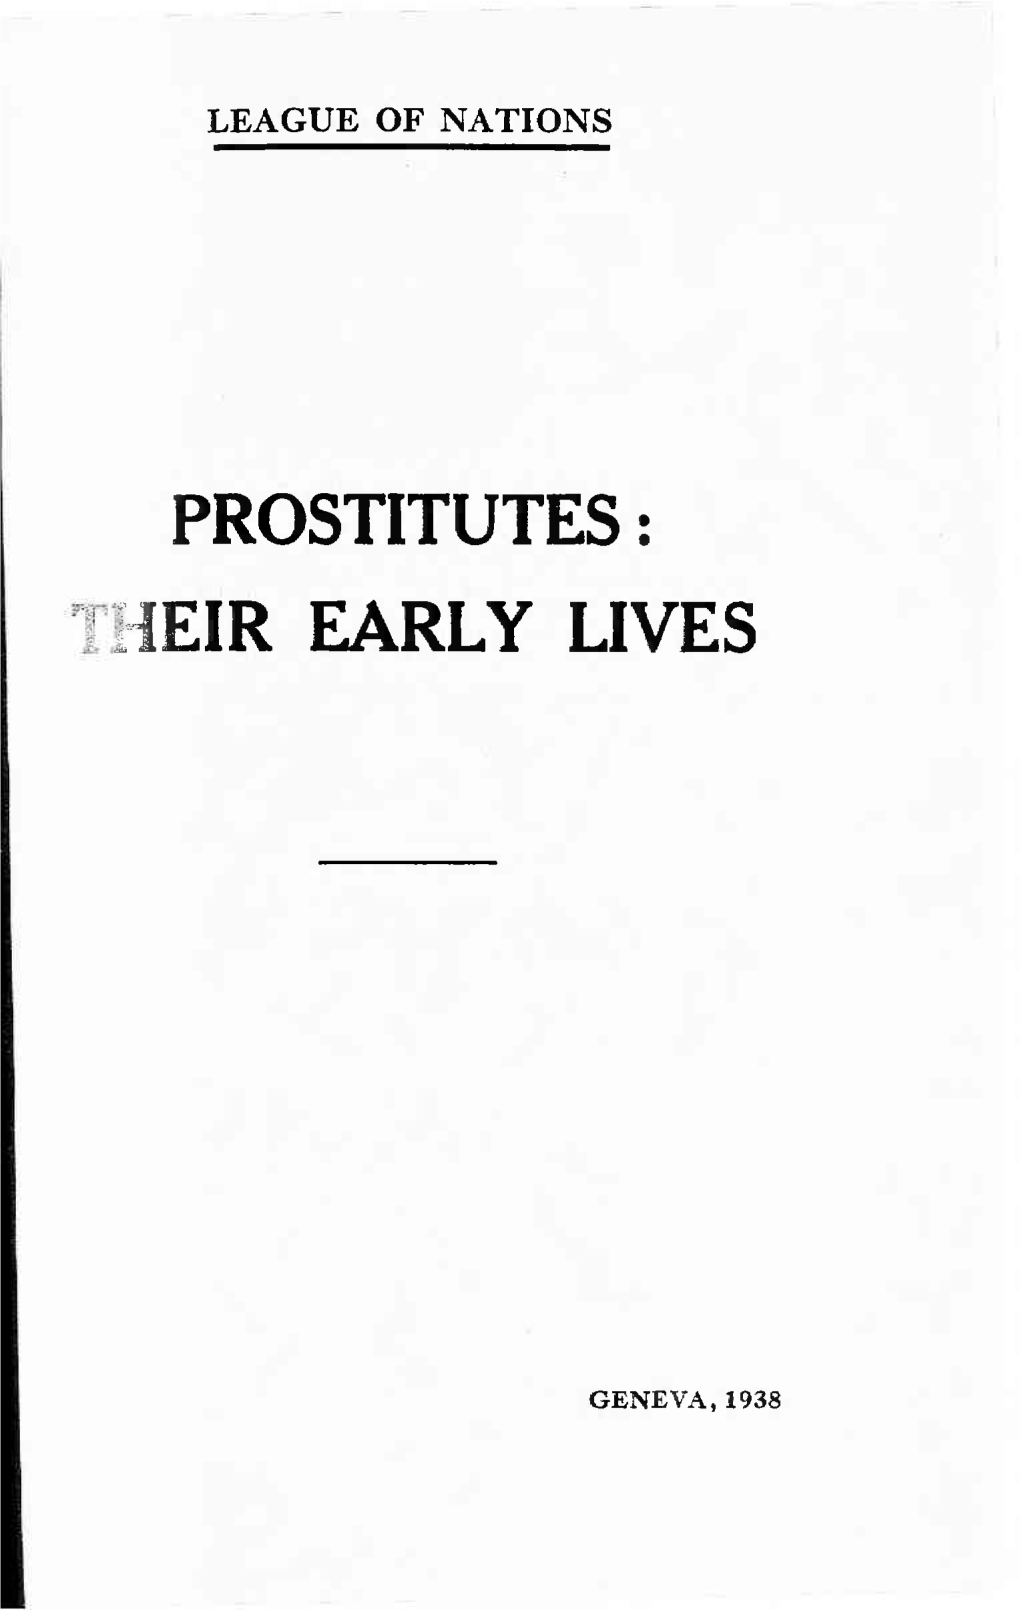 Prostitutes : Heir Early Lives